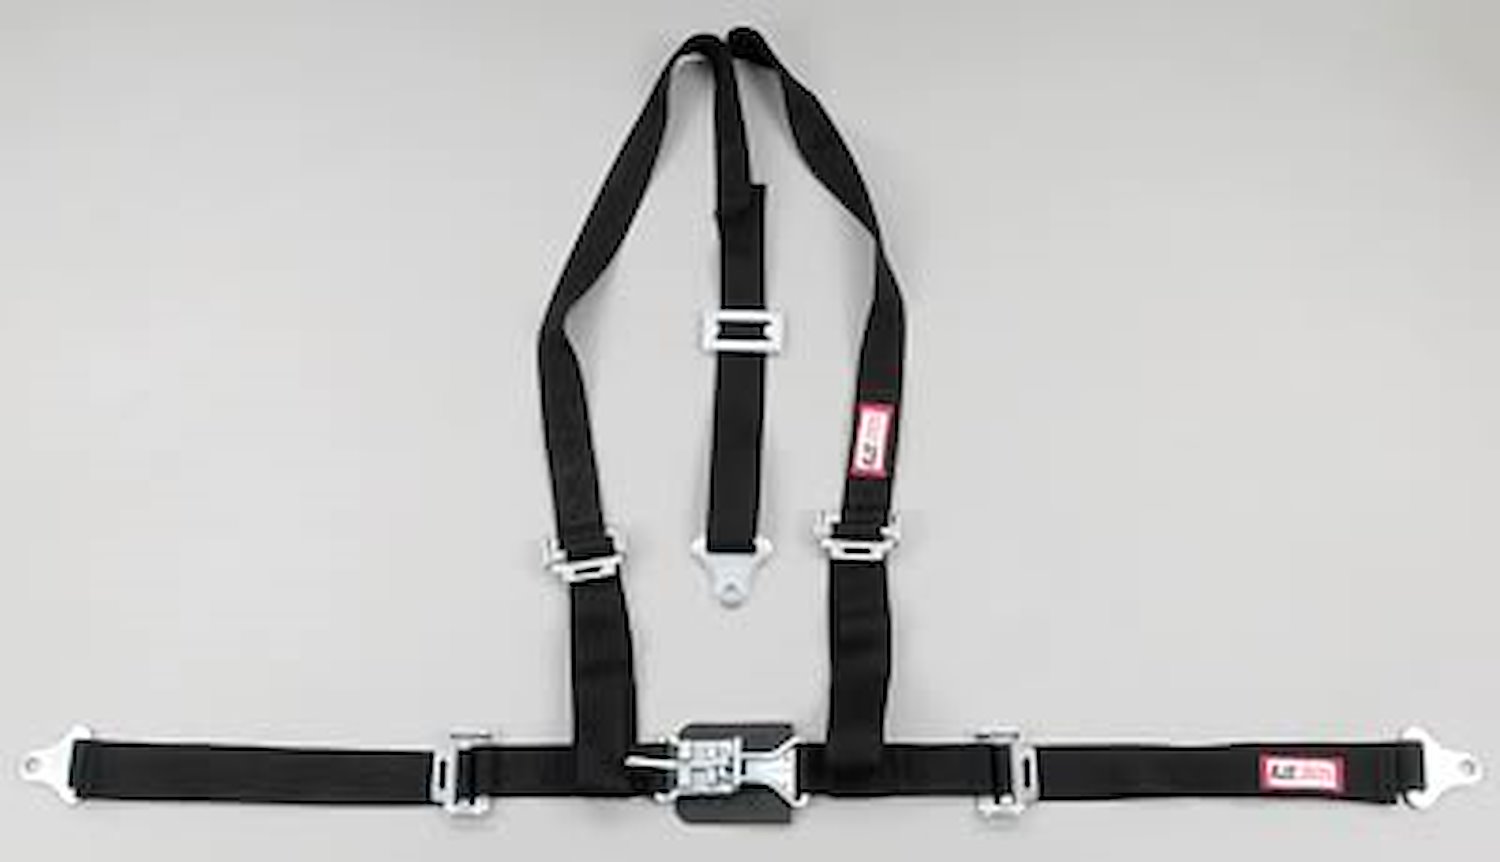 NON-SFI L&L HARNESS 2 PULL UP Lap Belt SNAP SEWN IN 2 S.H. Y FLOOR Mount w/STERNUM STRAP WRAP/BOLT HOT PINK